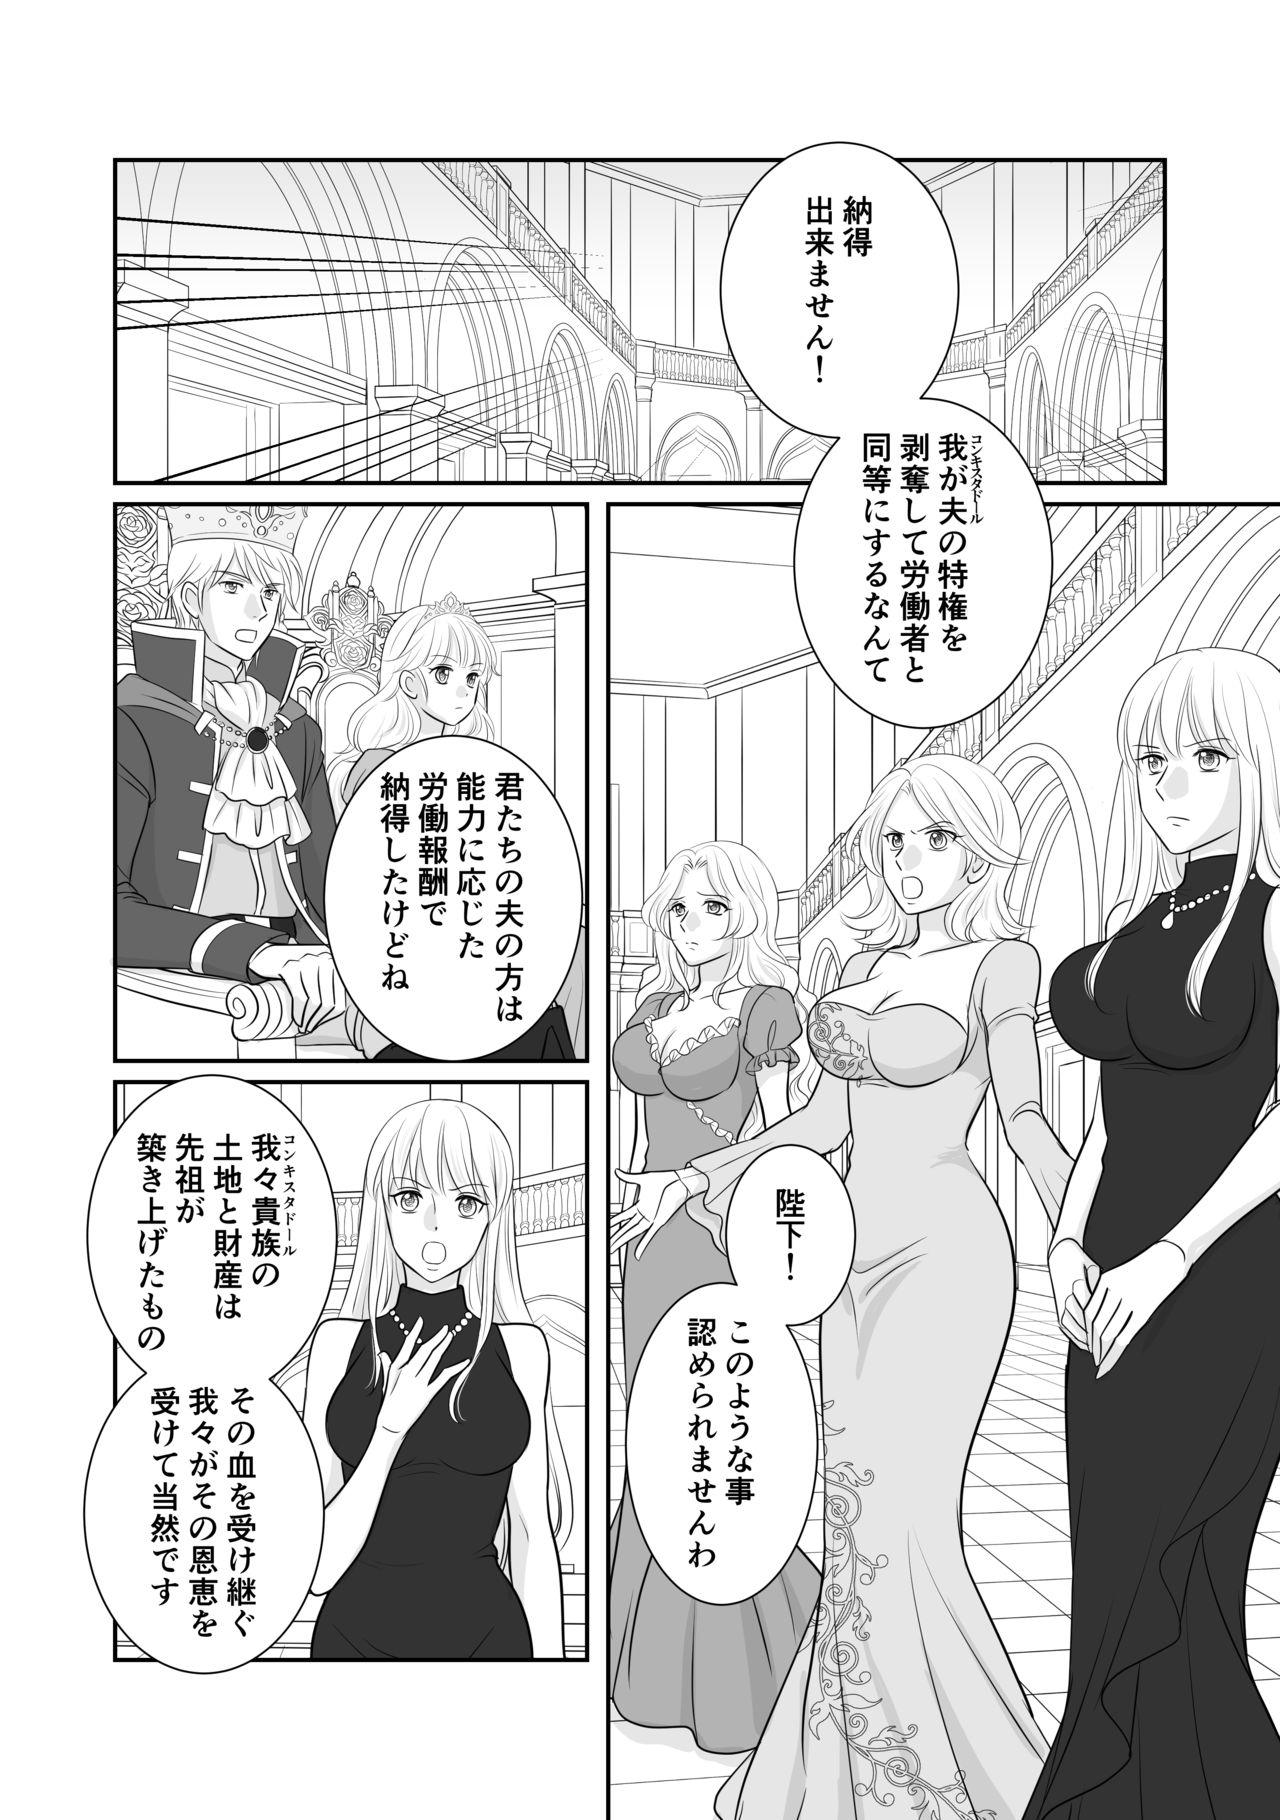 Misogyny Conquest Chapter 4 0